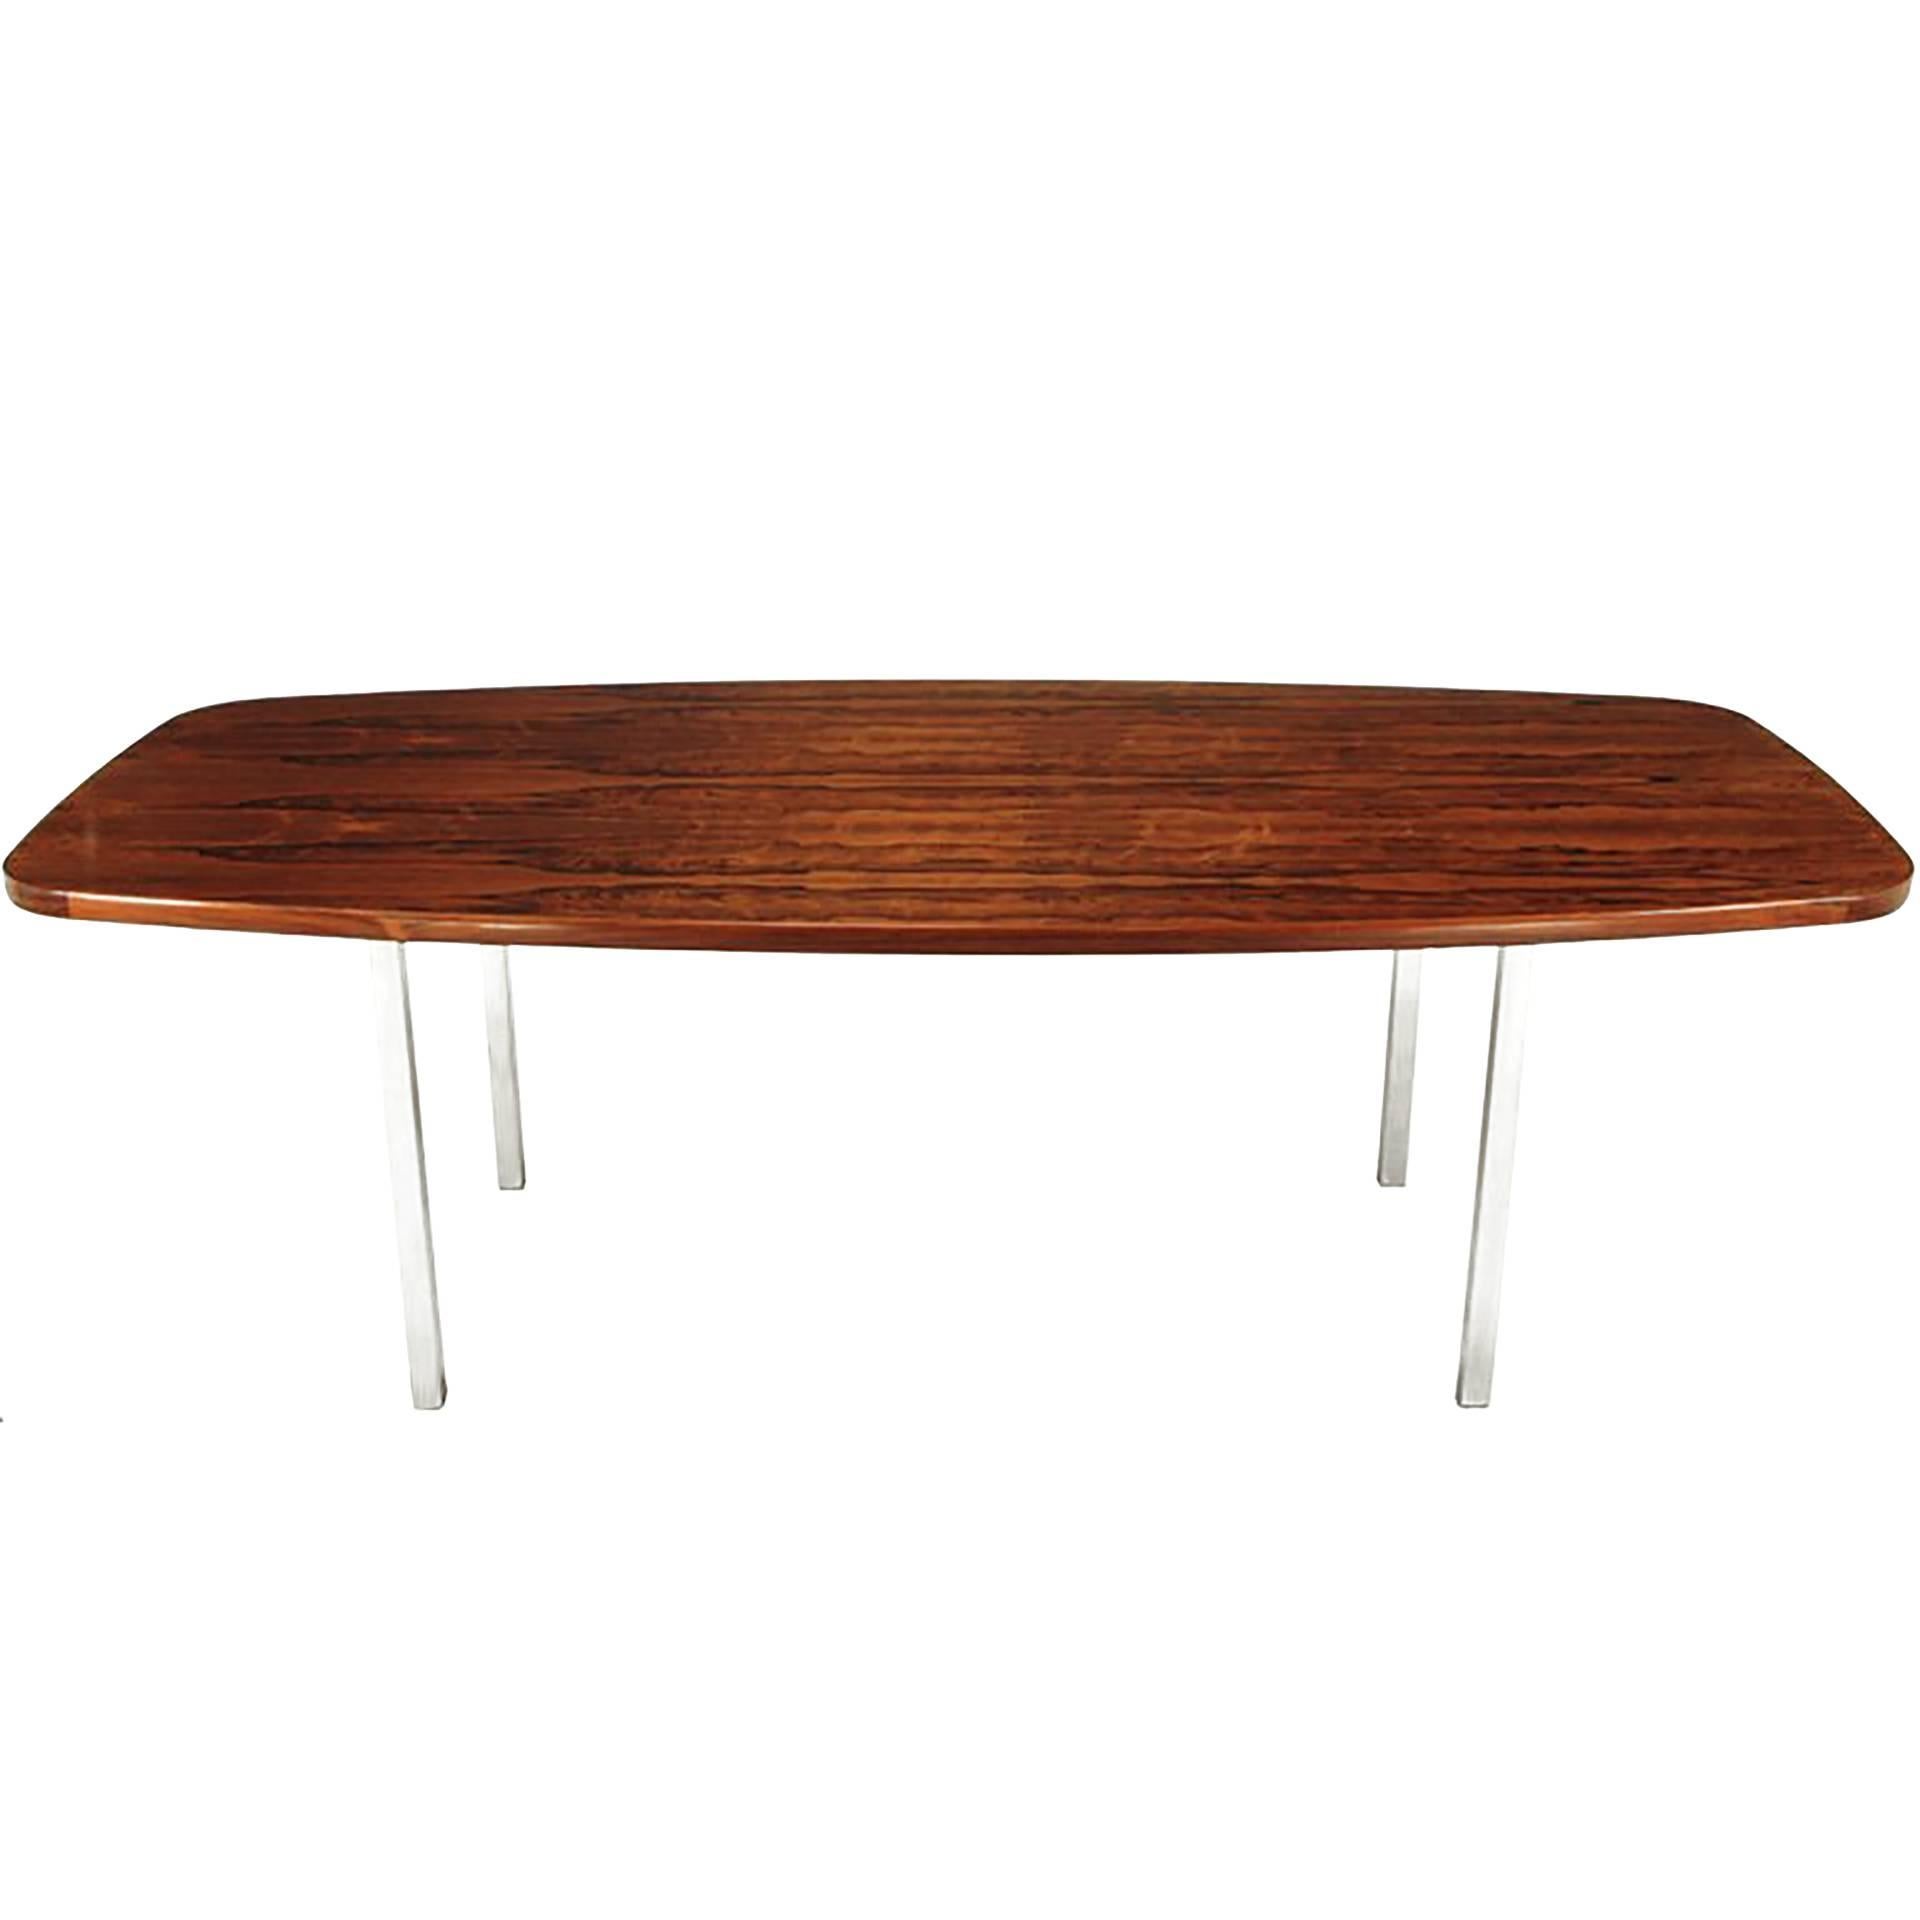 Dunbar Rosewood Dining Table with Polished Stainless Steel Base